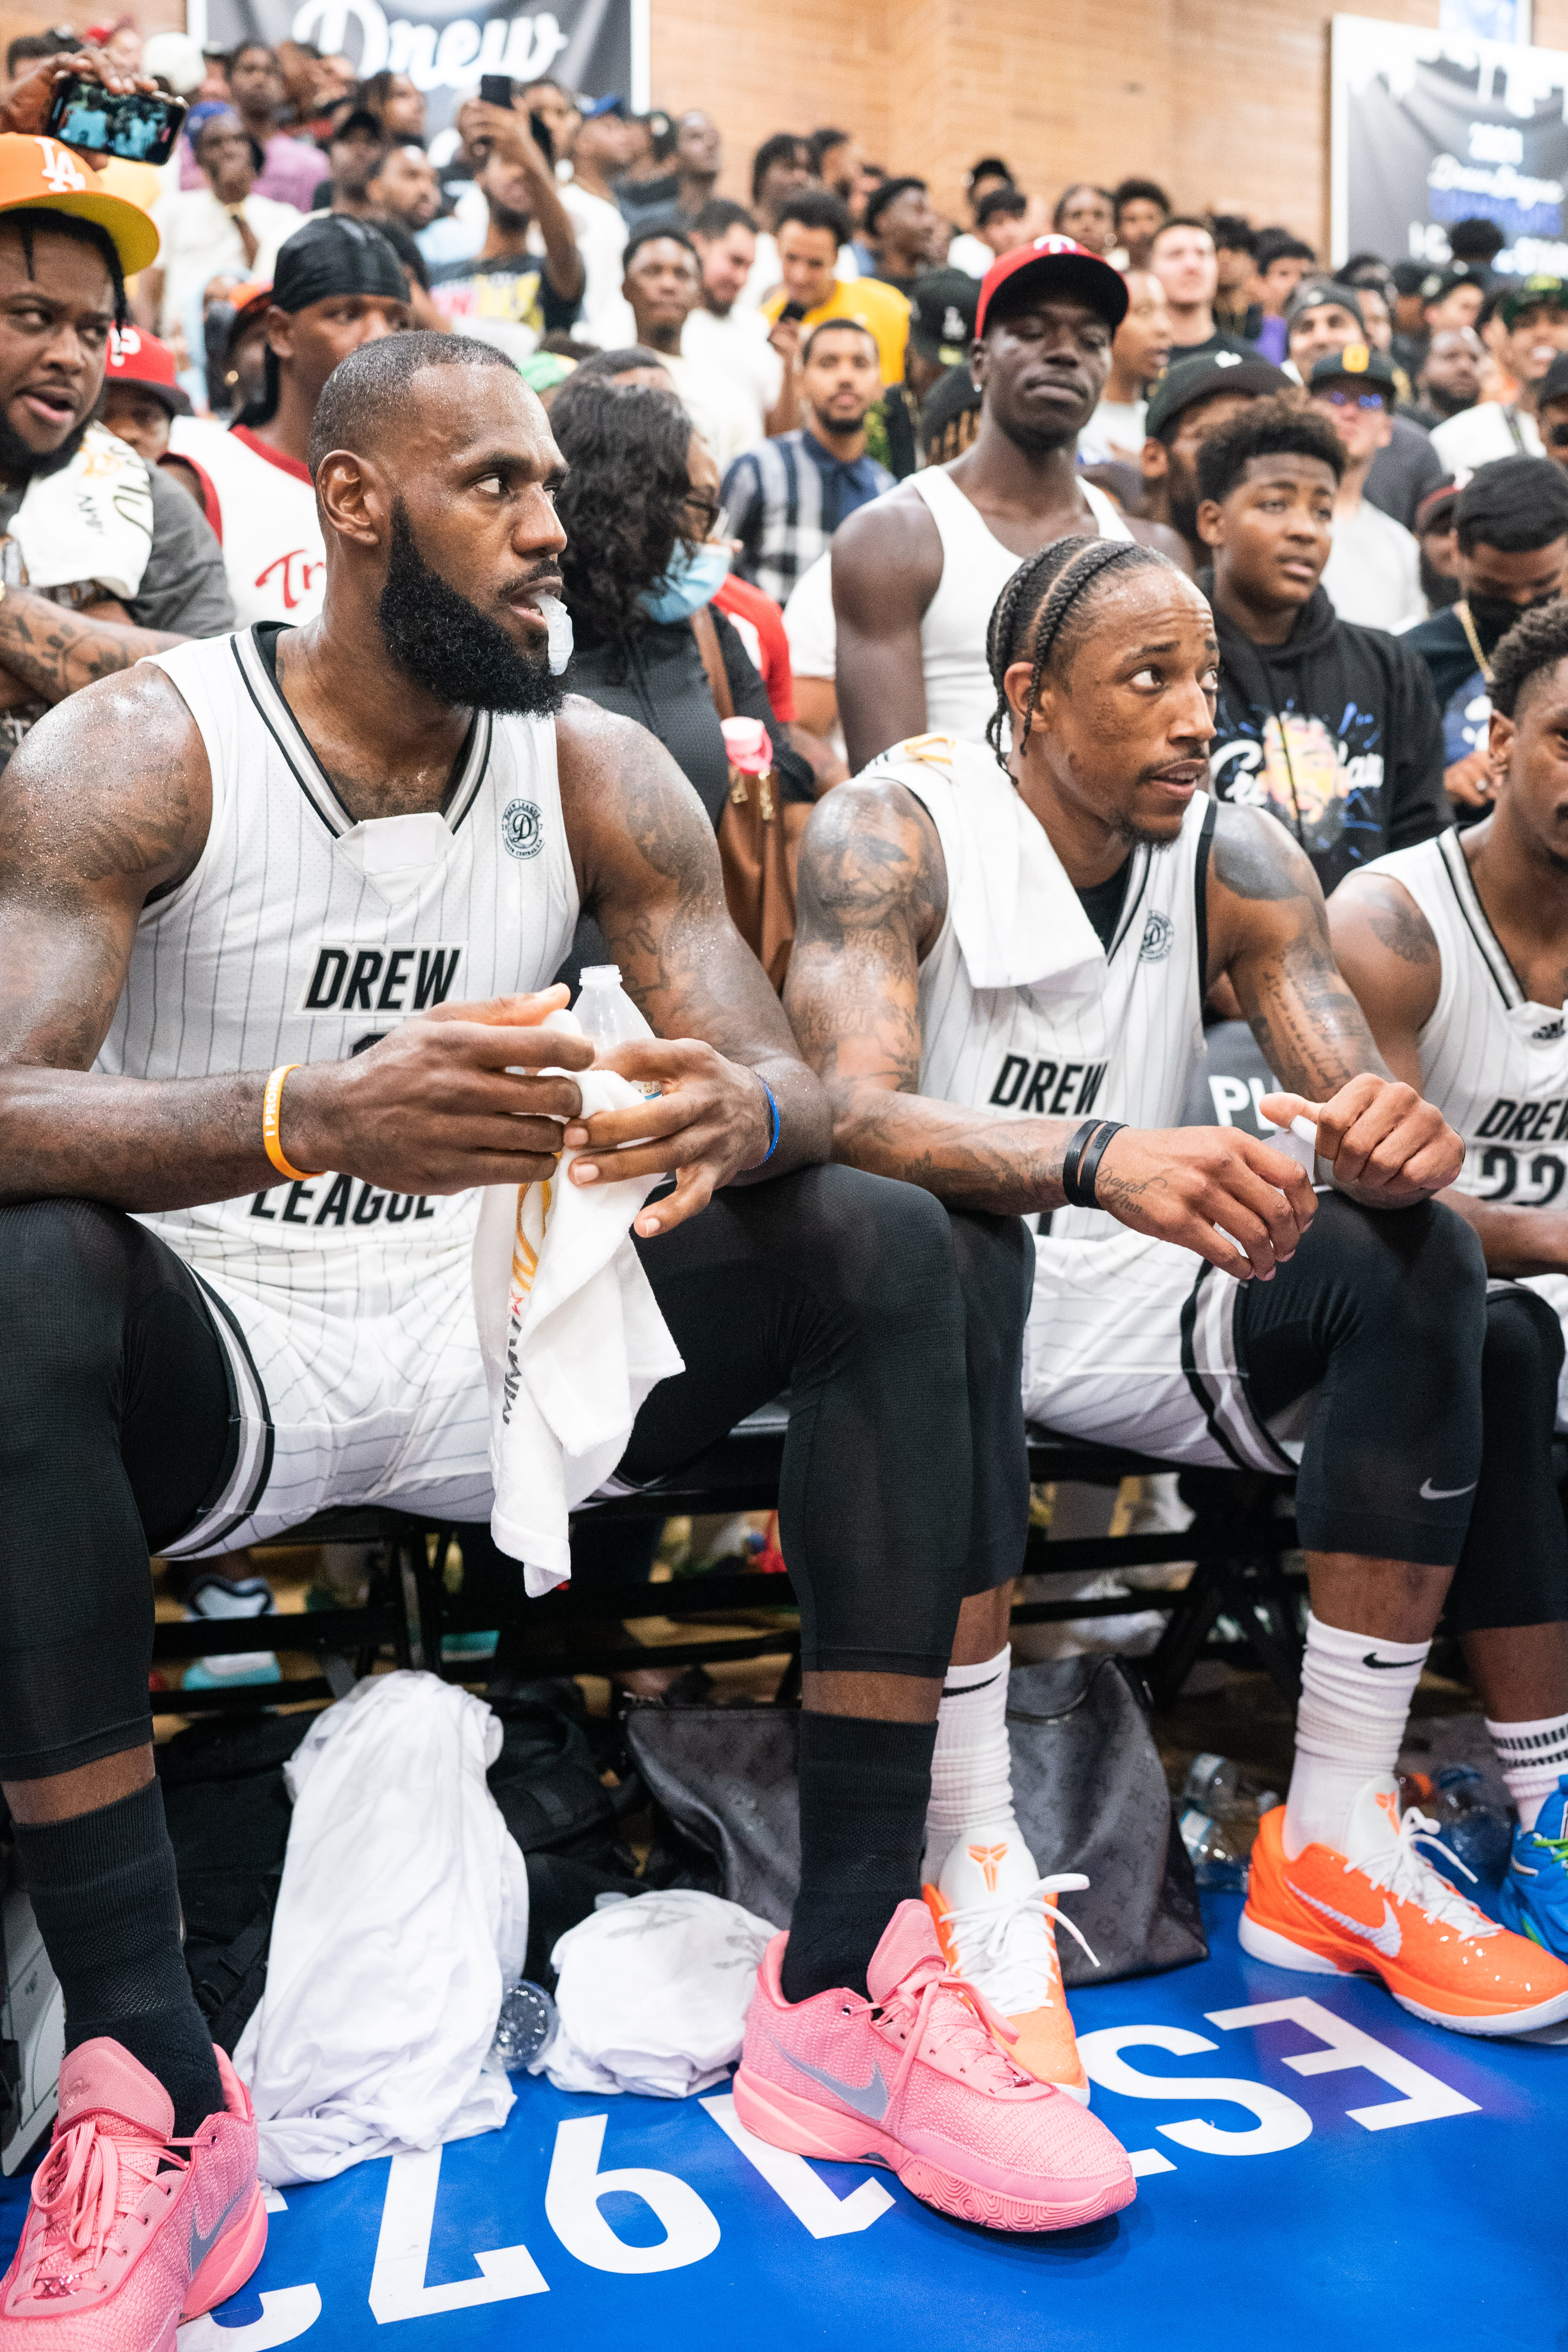 LeBron James Wears Unreleased Nike Shoes at Drew League - Sports